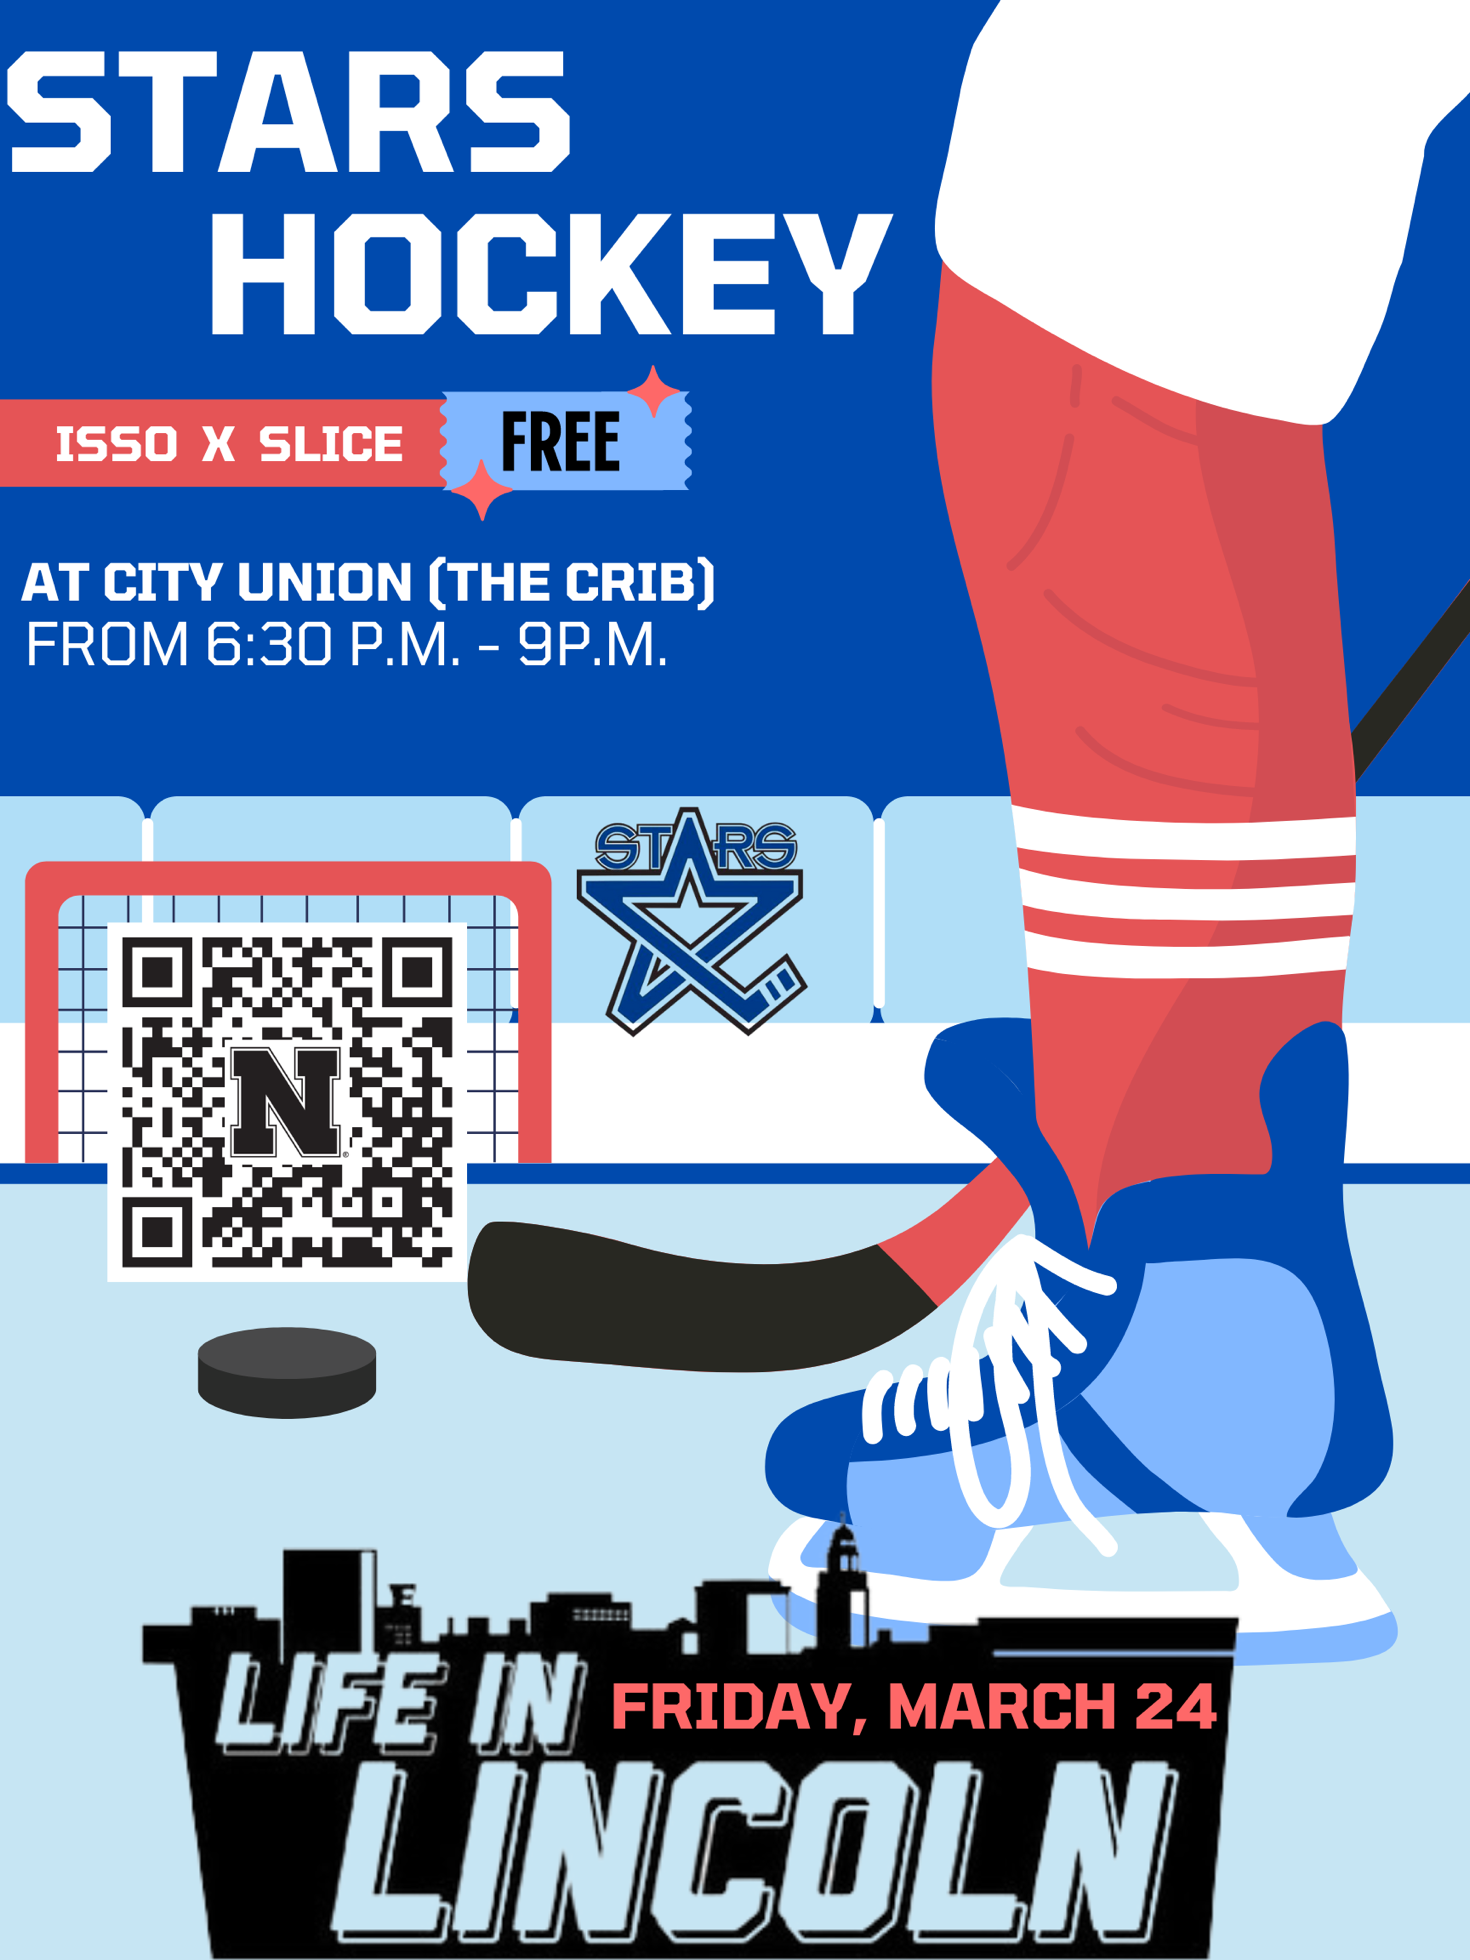 Life in Lincoln Stars Ice Hockey Game Announce University of